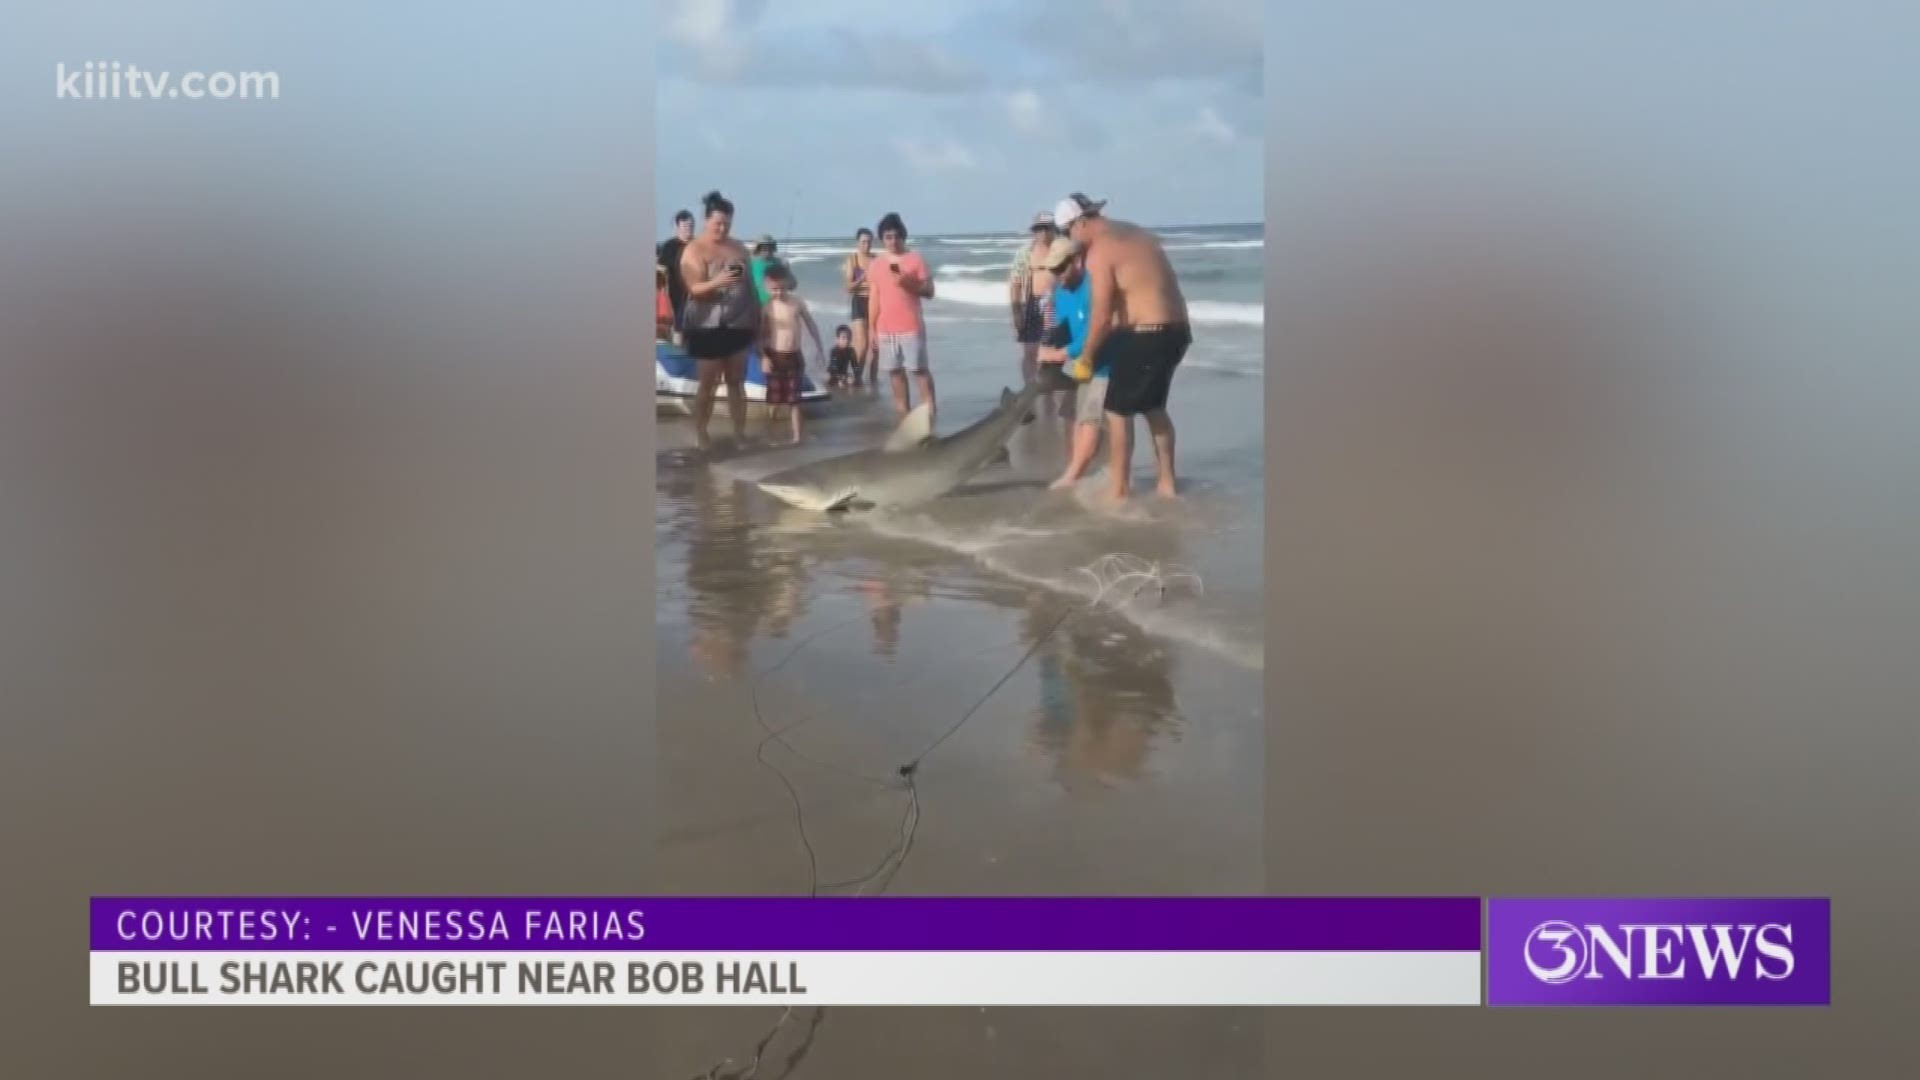 A Texas fisherman had a catch of a lifetime over that weekend at Bob Hall Pier.